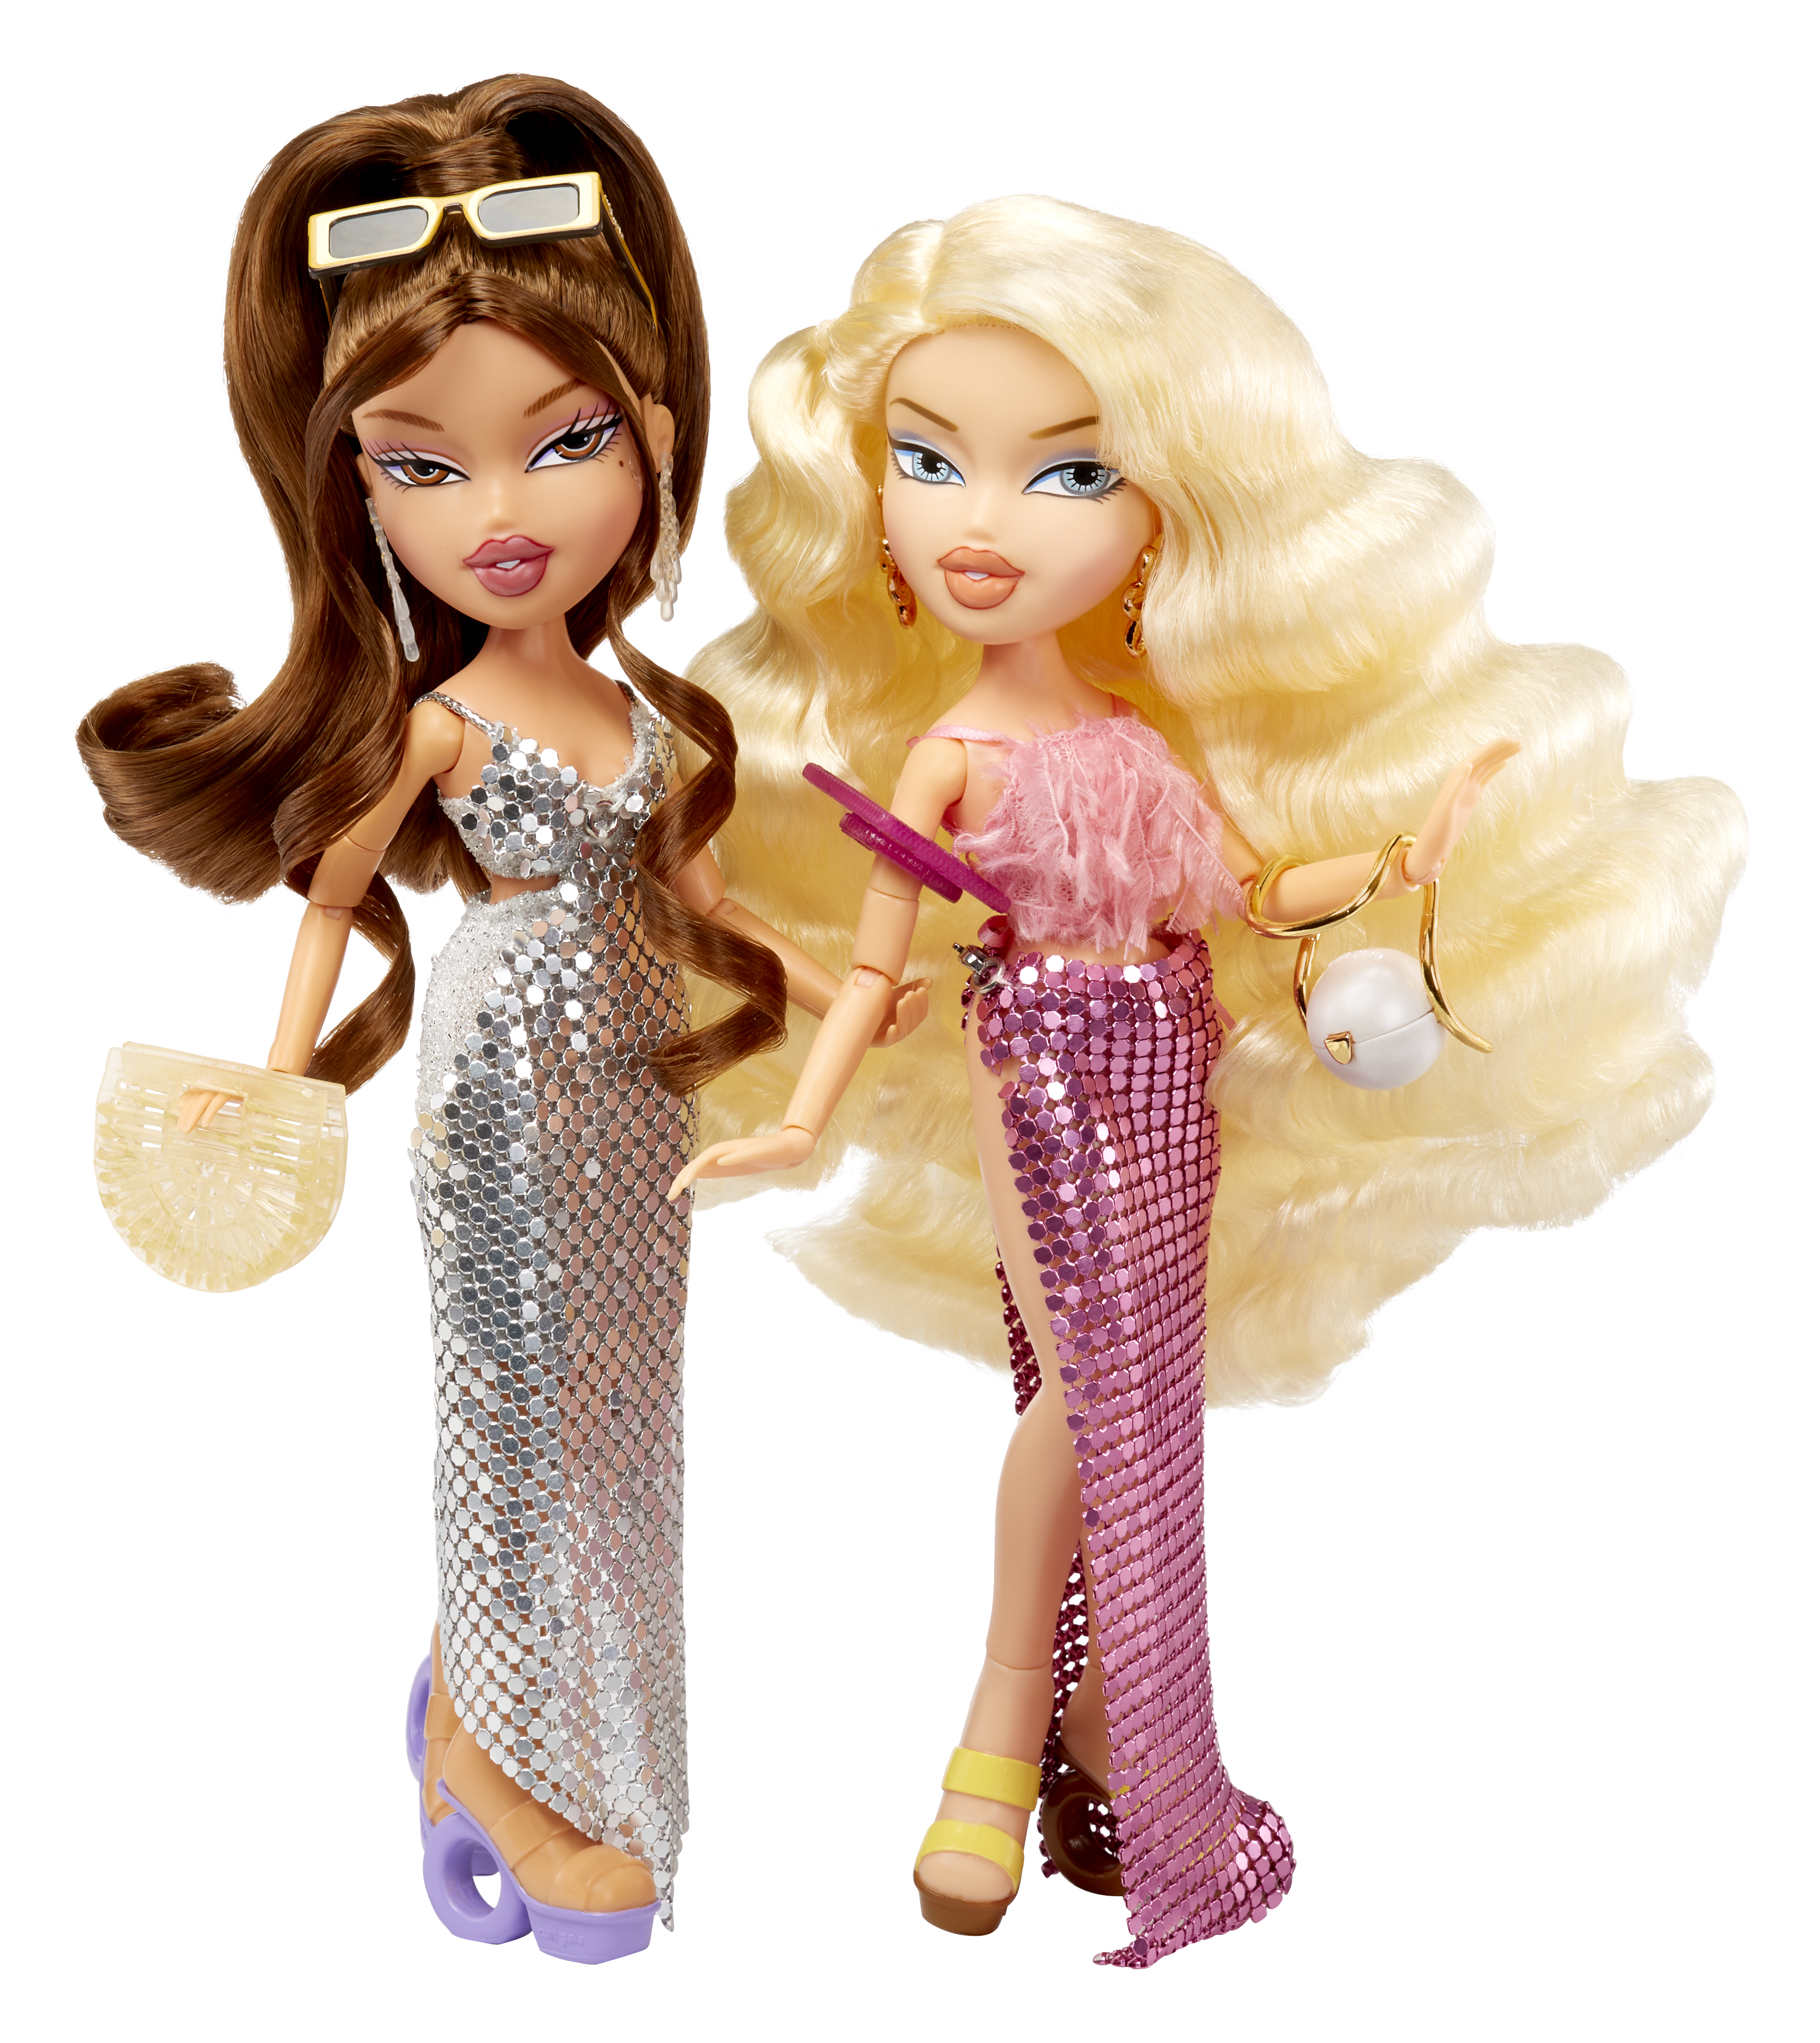 Bratz® x Cult Gaia Special Edition Designer Cloe Fashion Doll with 2 Outfits, Assembled 12 inch - image 5 of 6